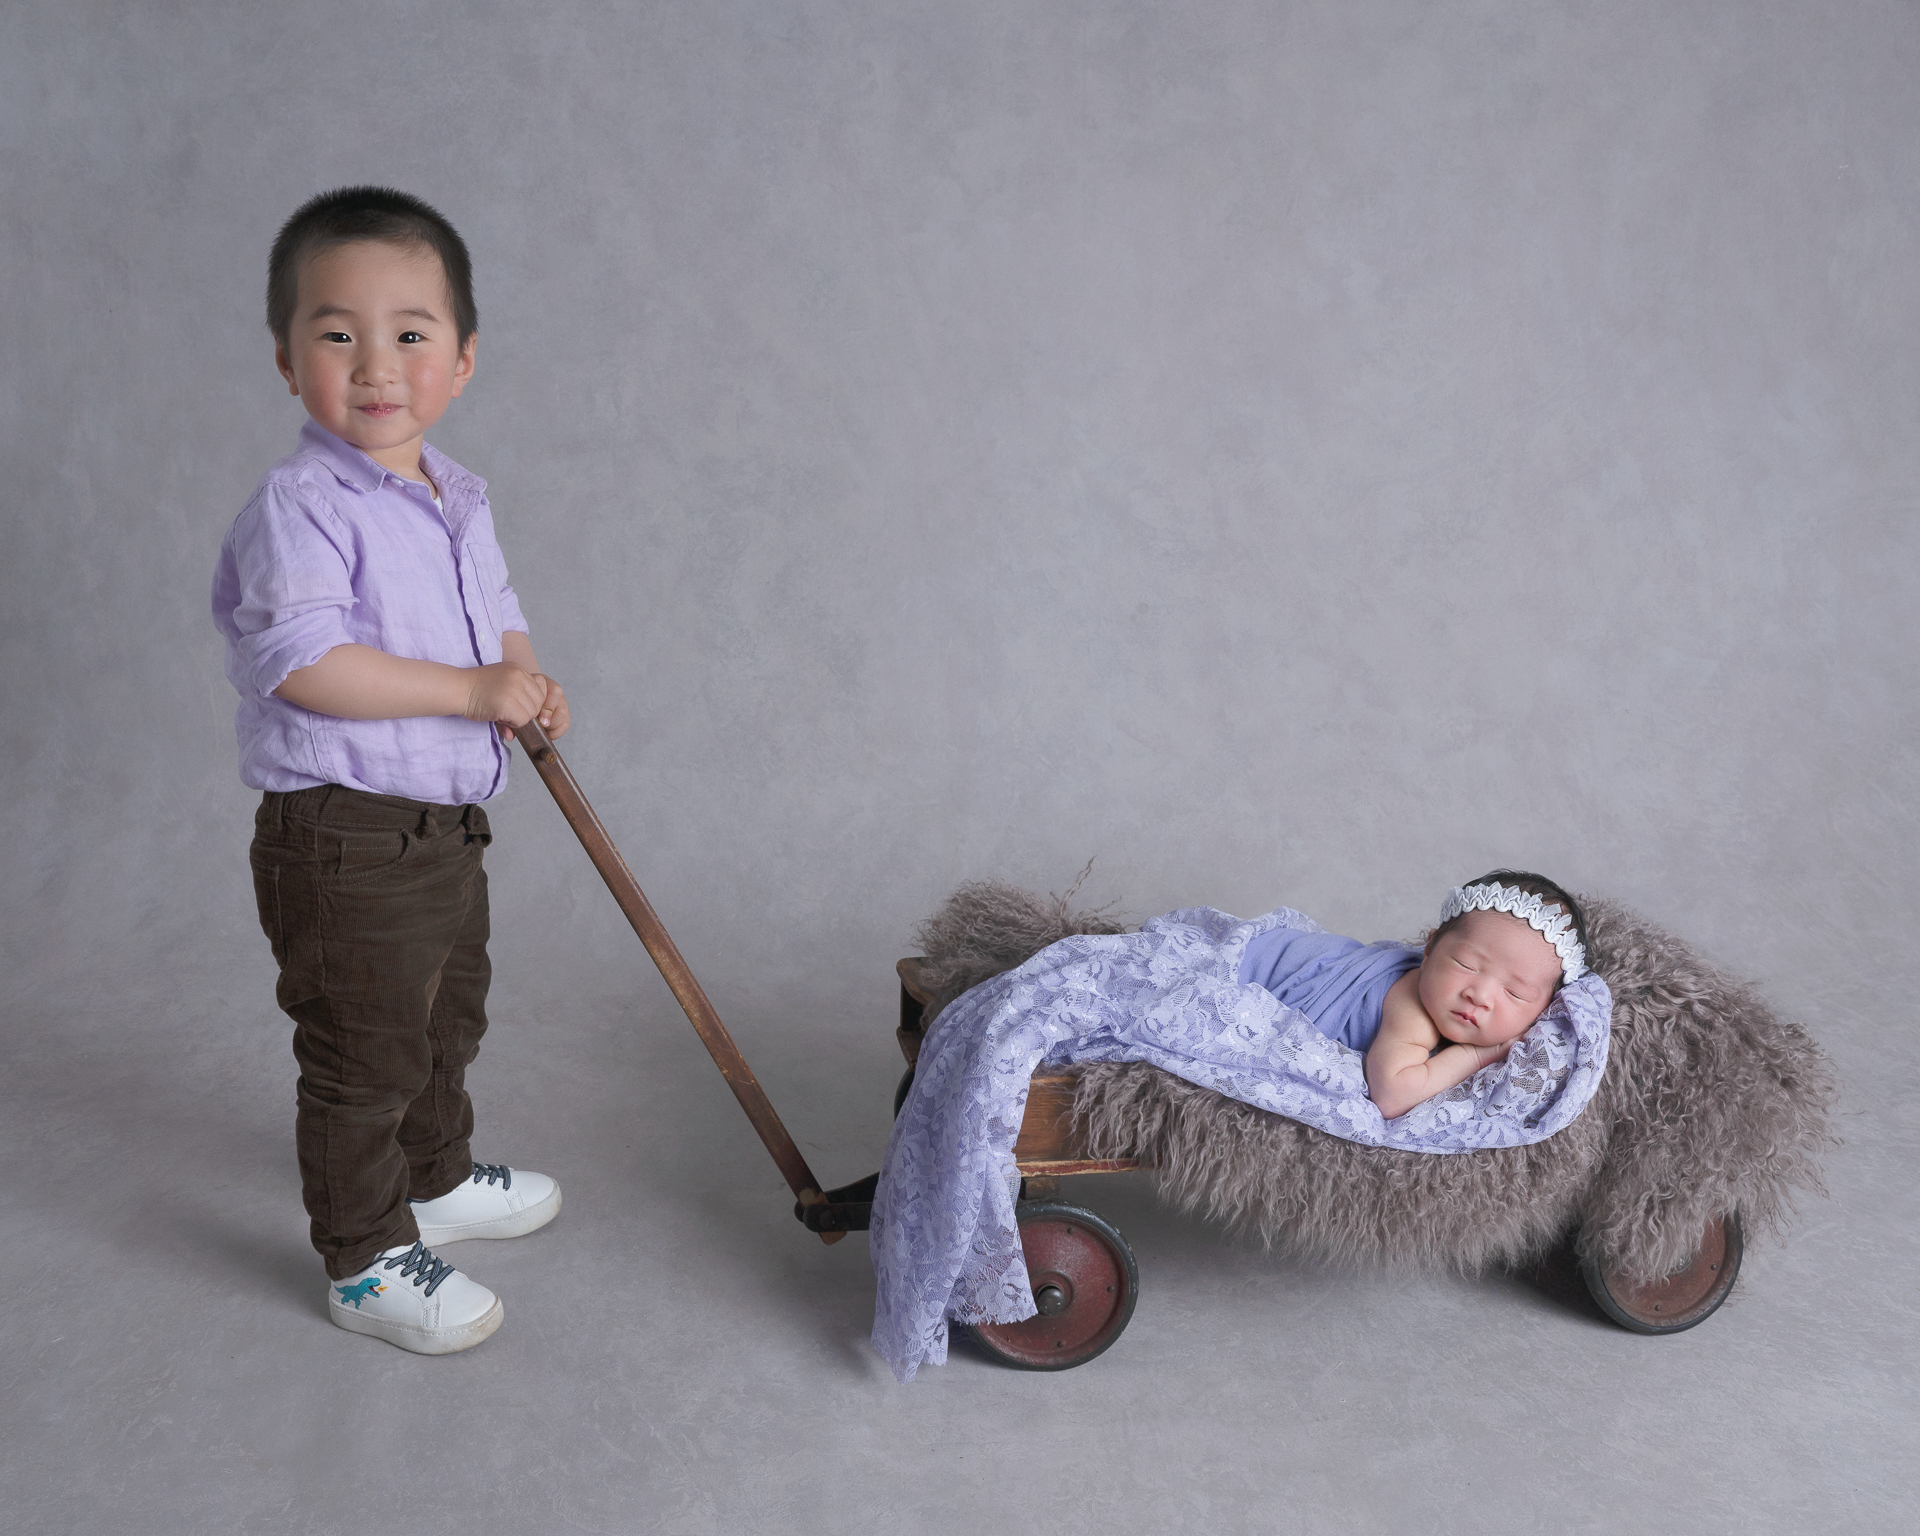 Big brother holds onto wagon handle in which his newborn sister rests at. Both wear purple outfits. Baby wears light color headband. Gray backdrop.